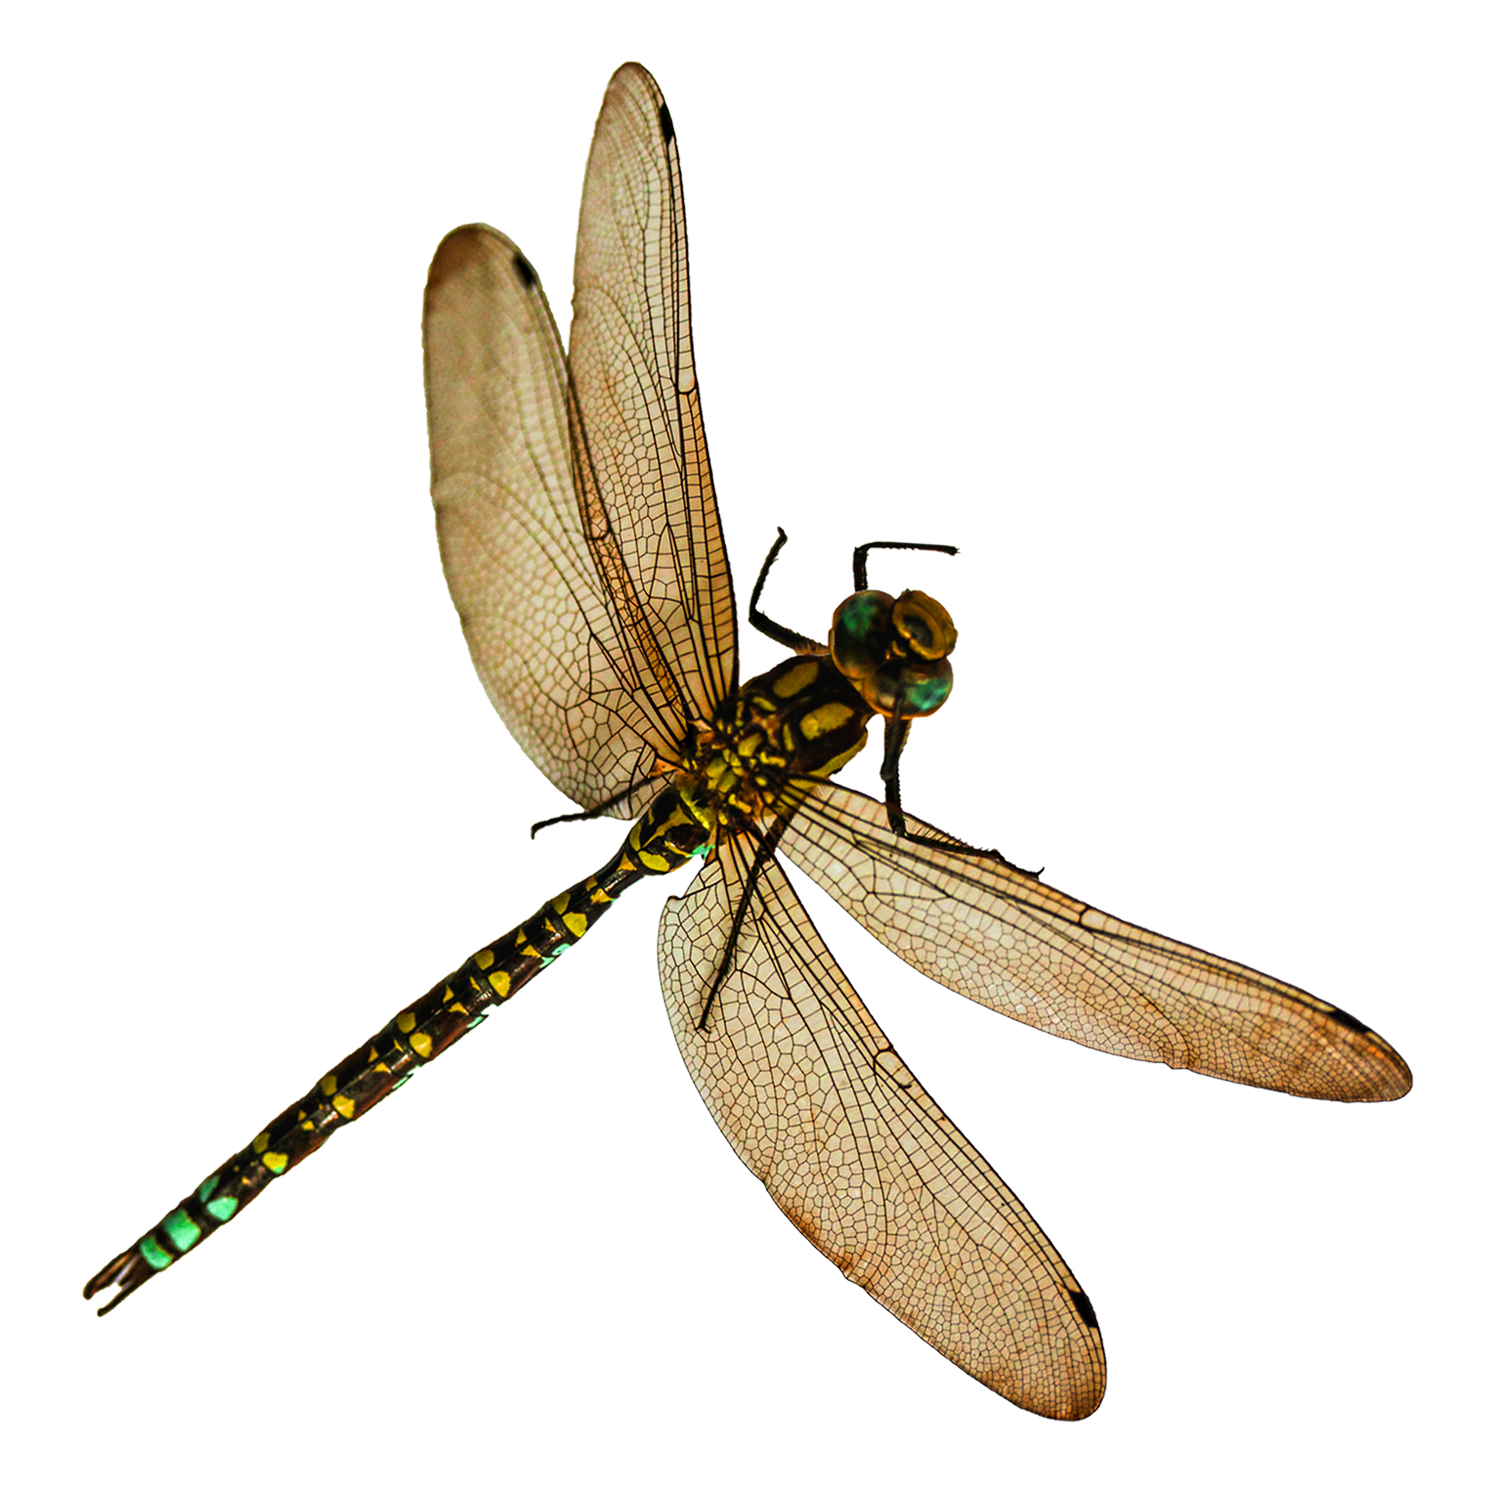 download dragonfly image #39364